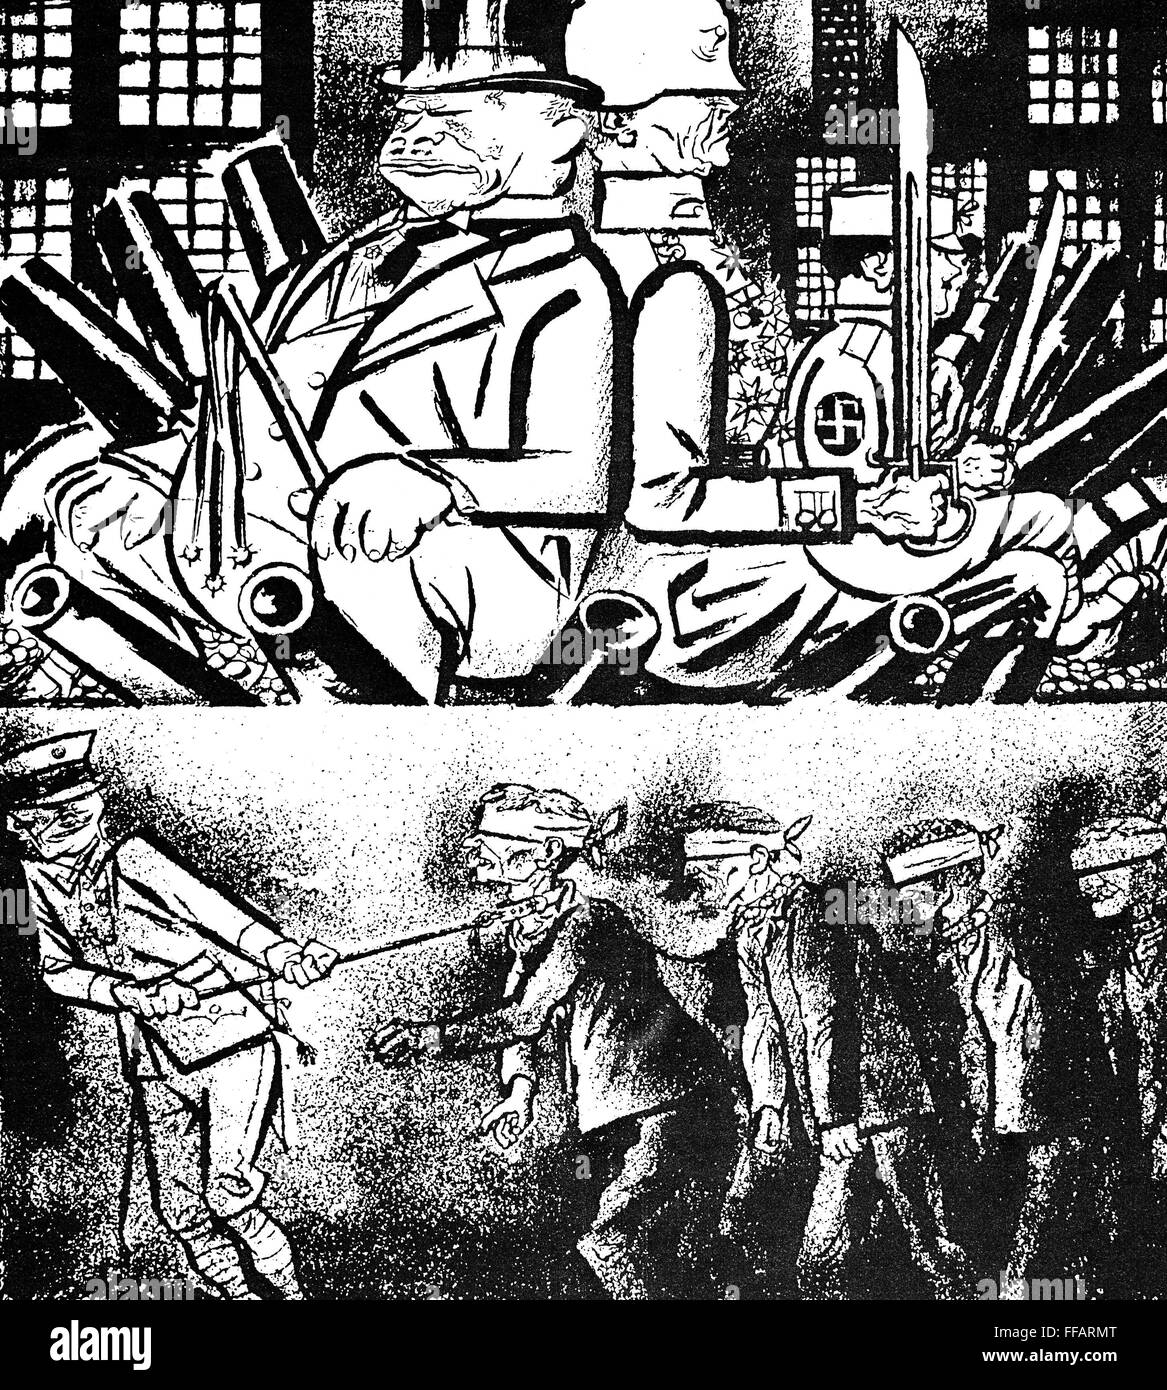 GROSZ: FATHERLAND, 1924. /n'For the Fatherland--to the Slaughterhouse.' Pen and ink drawing, 1924, by George Grosz. EDITORIAL USE ONLY. Stock Photo